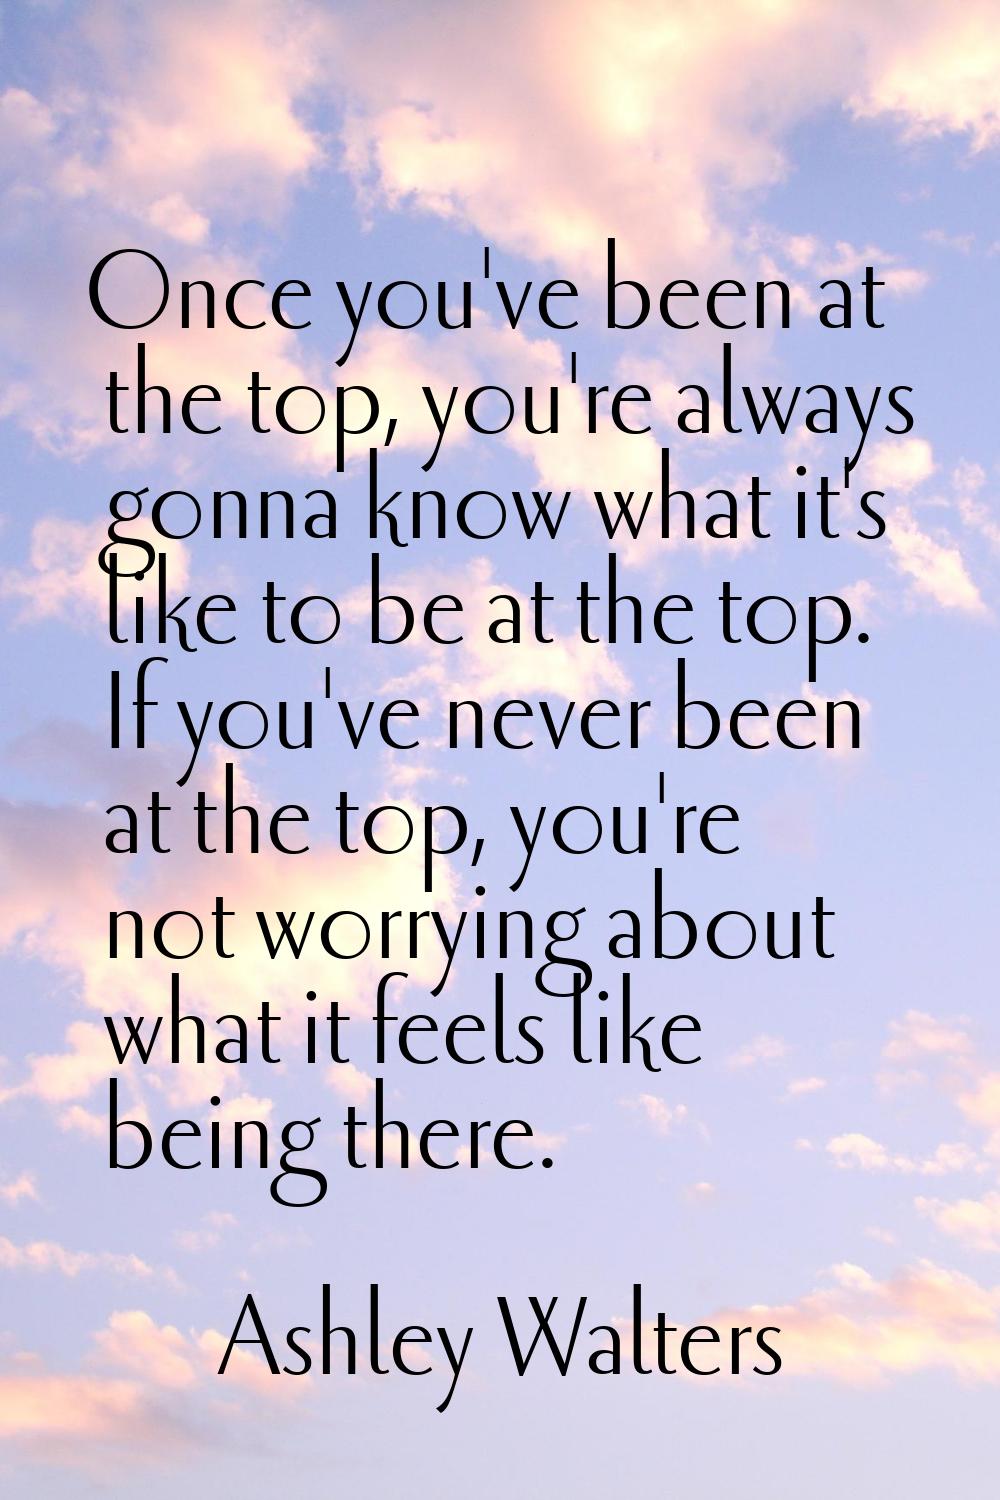 Once you've been at the top, you're always gonna know what it's like to be at the top. If you've ne